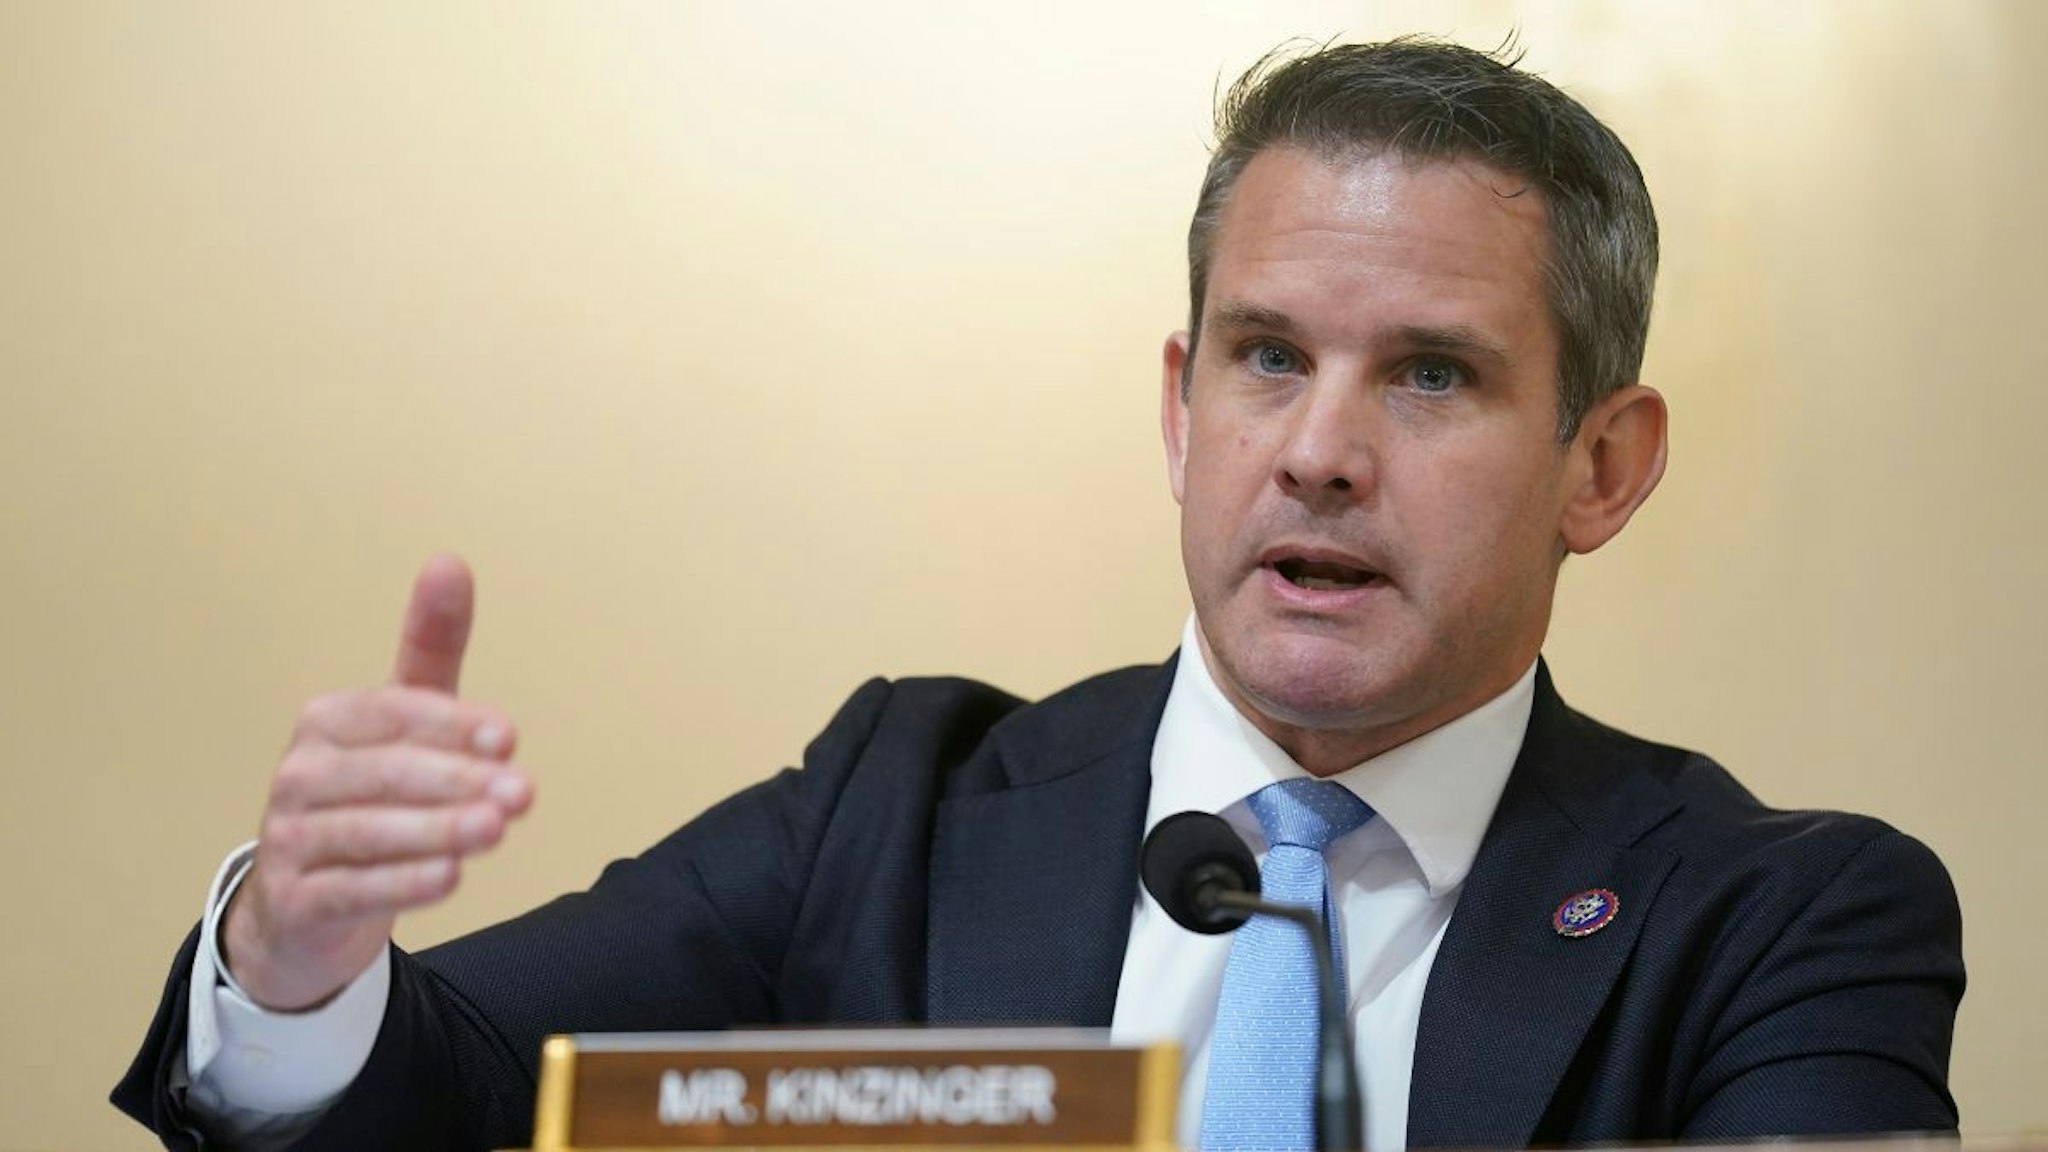 Rep. Adam Kinzinger (R-IL) questions witnesses during the House Select Committee investigating the January 6 attack on the U.S. Capitol on July 27, 2021 at the Cannon House Office Building in Washington, DC.